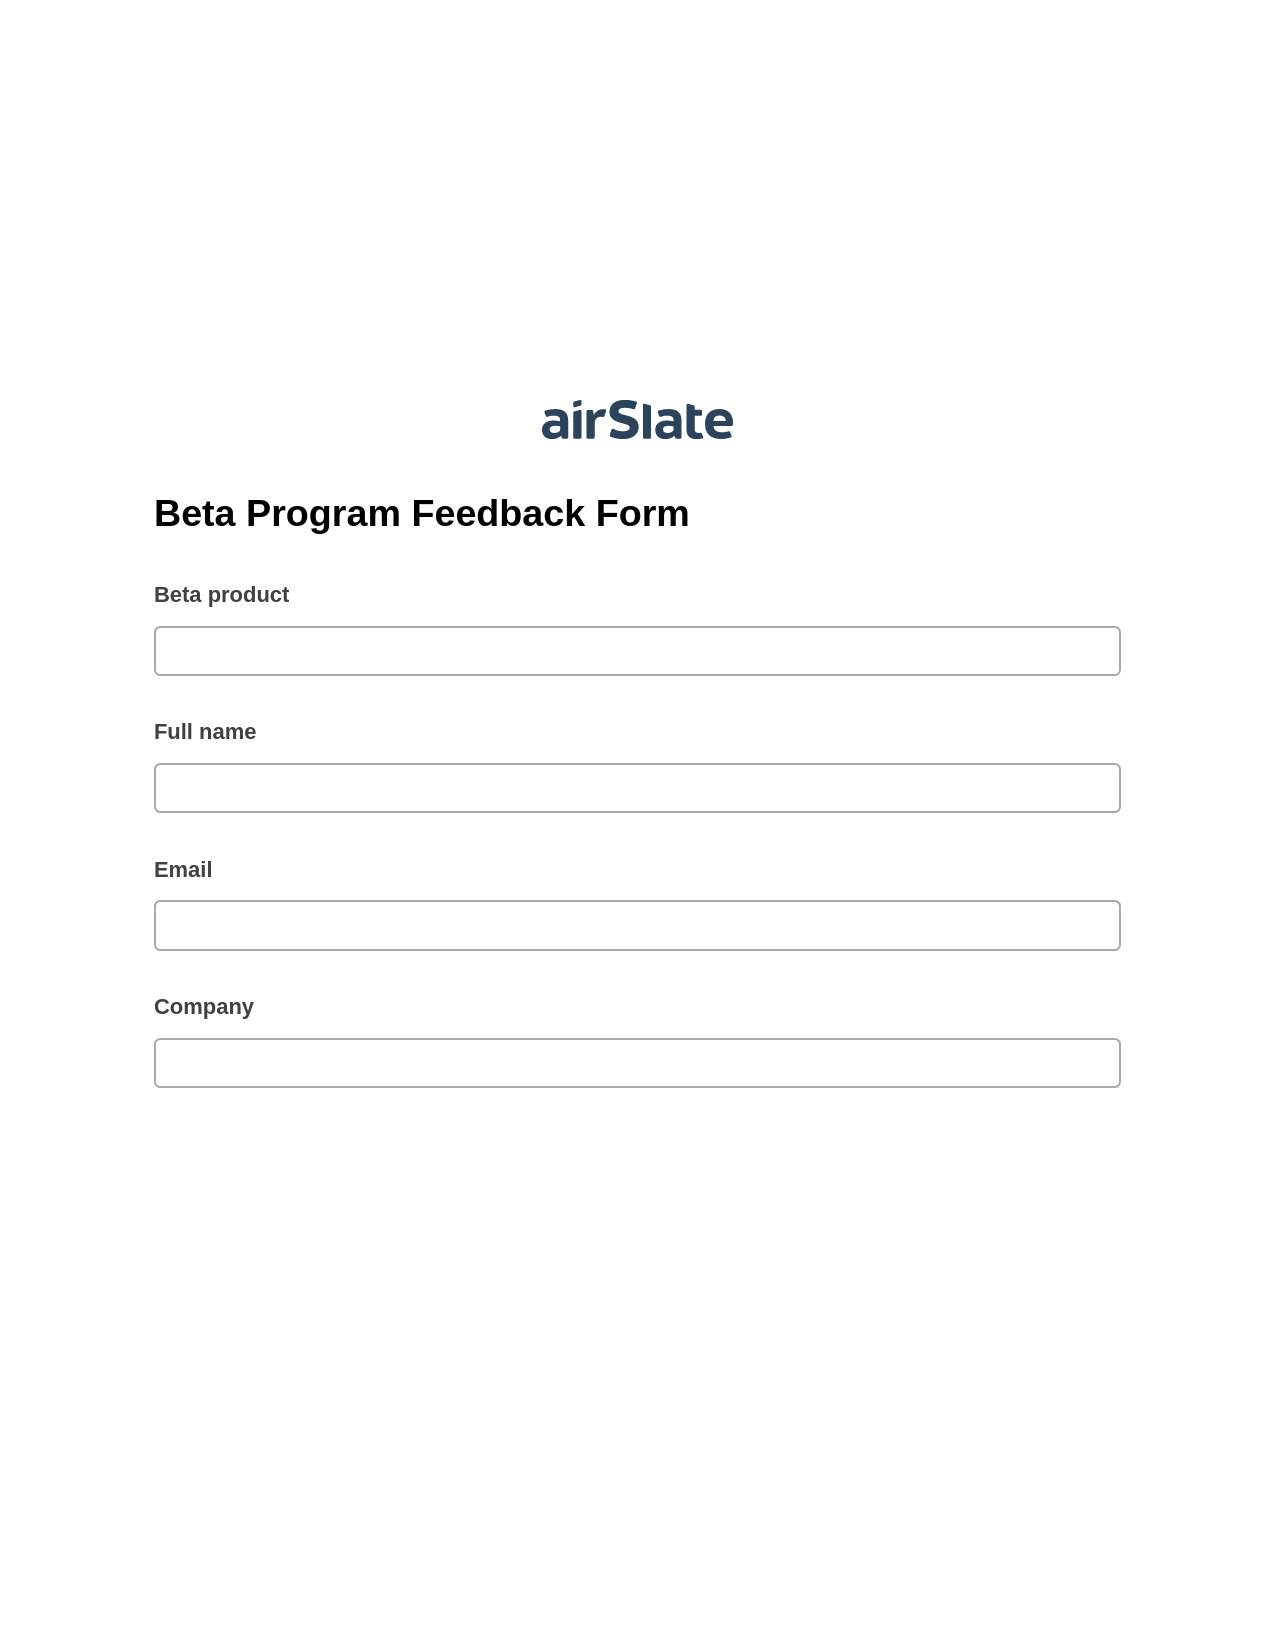 Beta Program Feedback Form Pre-fill Dropdown from Airtable, Reminder Bot, Dropbox Bot